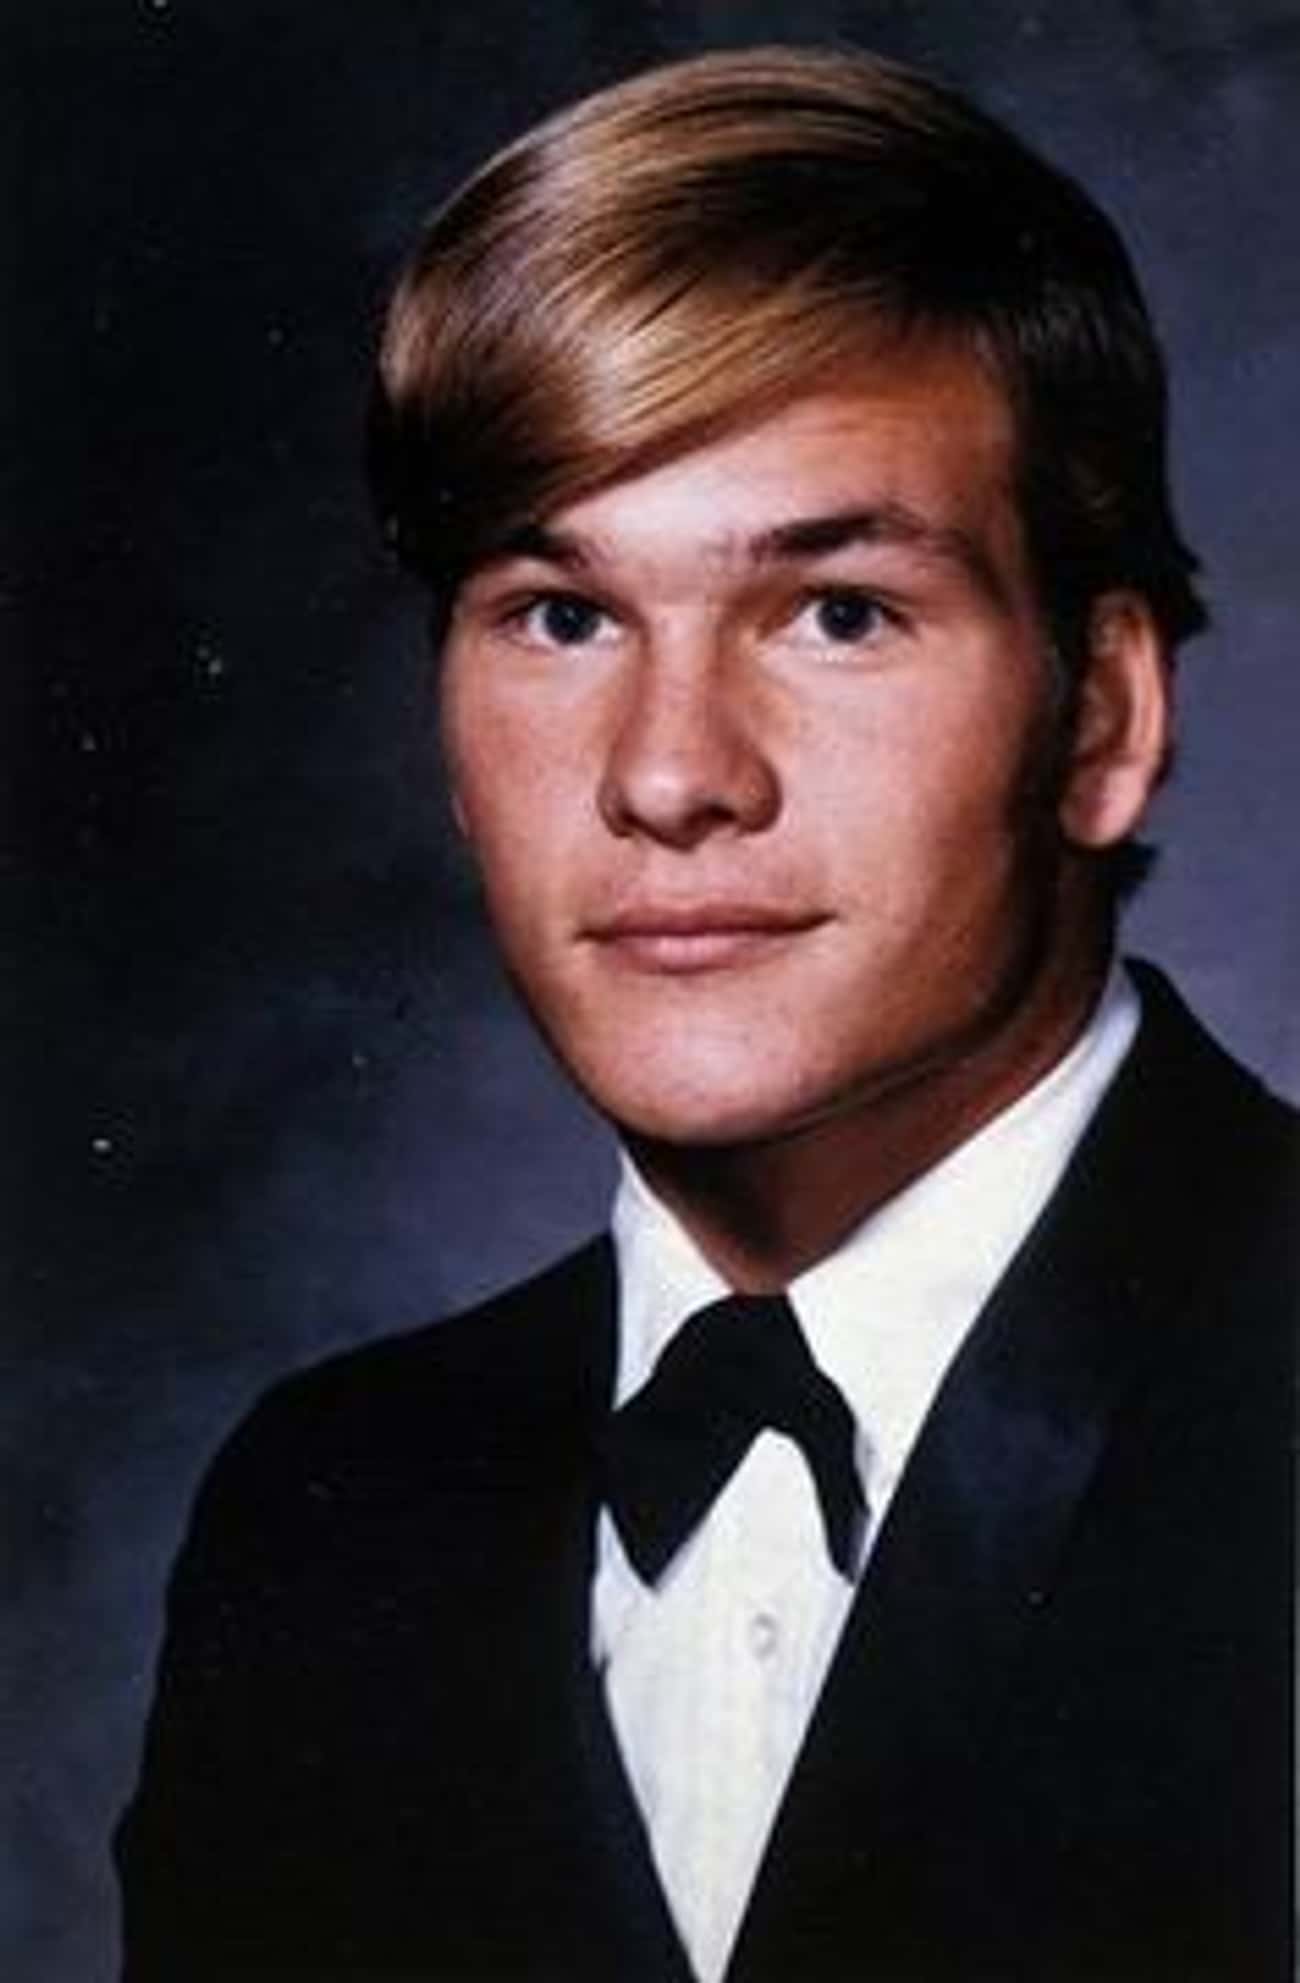 Young Patrick Swayze in Black Sports Coat and White Buttondown